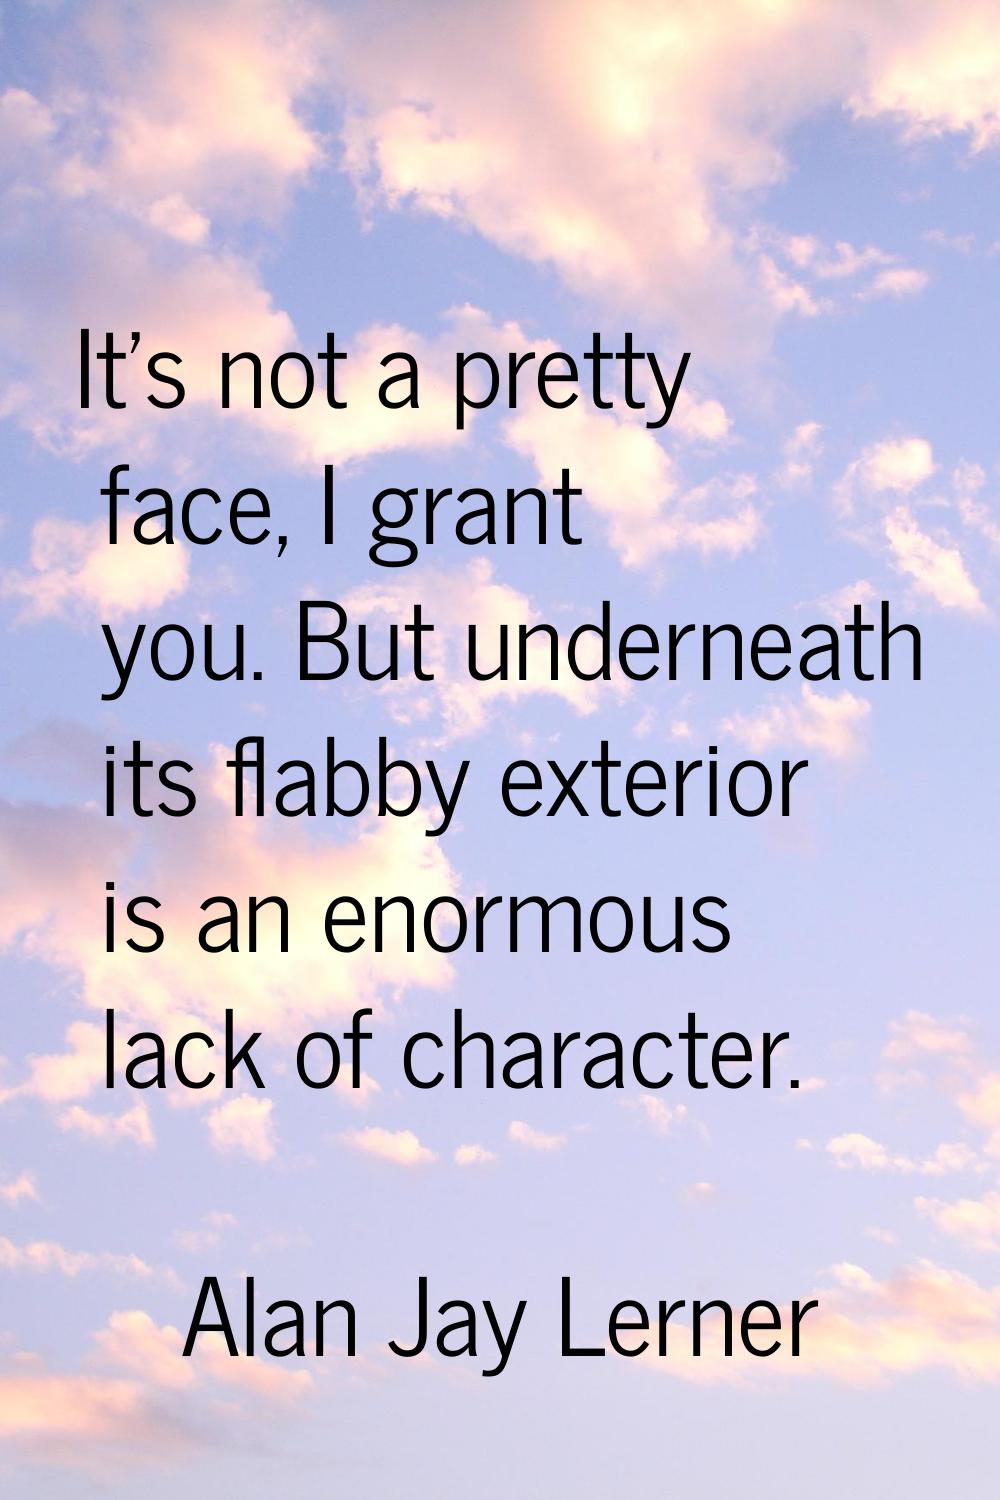 It's not a pretty face, I grant you. But underneath its flabby exterior is an enormous lack of char